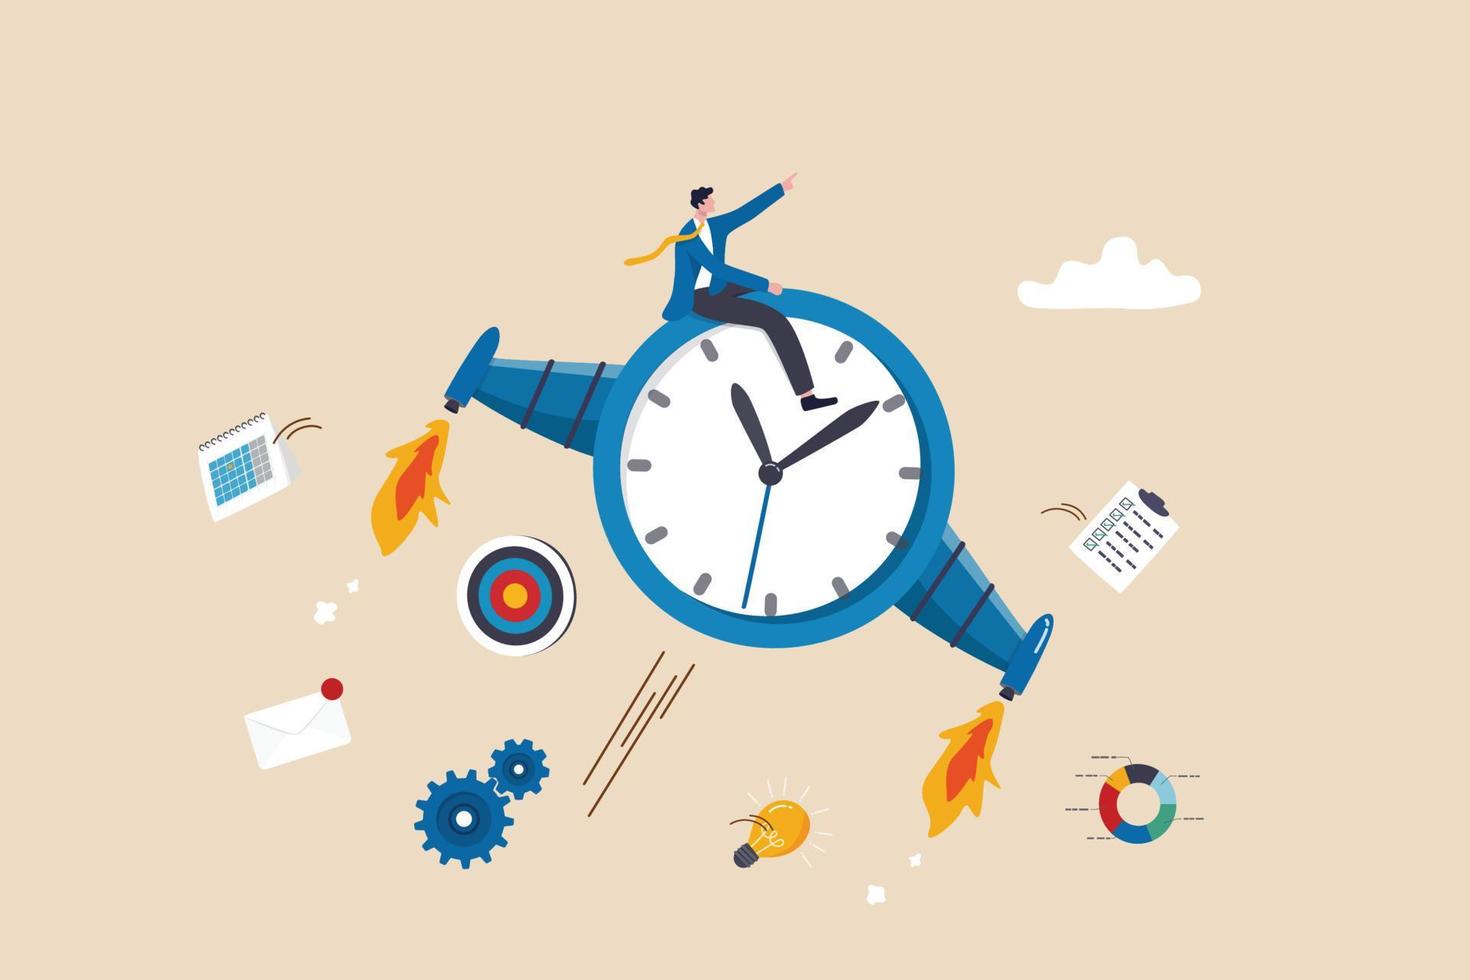 Improve productivity or efficiency, time management to finish within deadline, performance improvement or success concept, businessman riding fast flying clock with jetpack  increasing productivity. vector